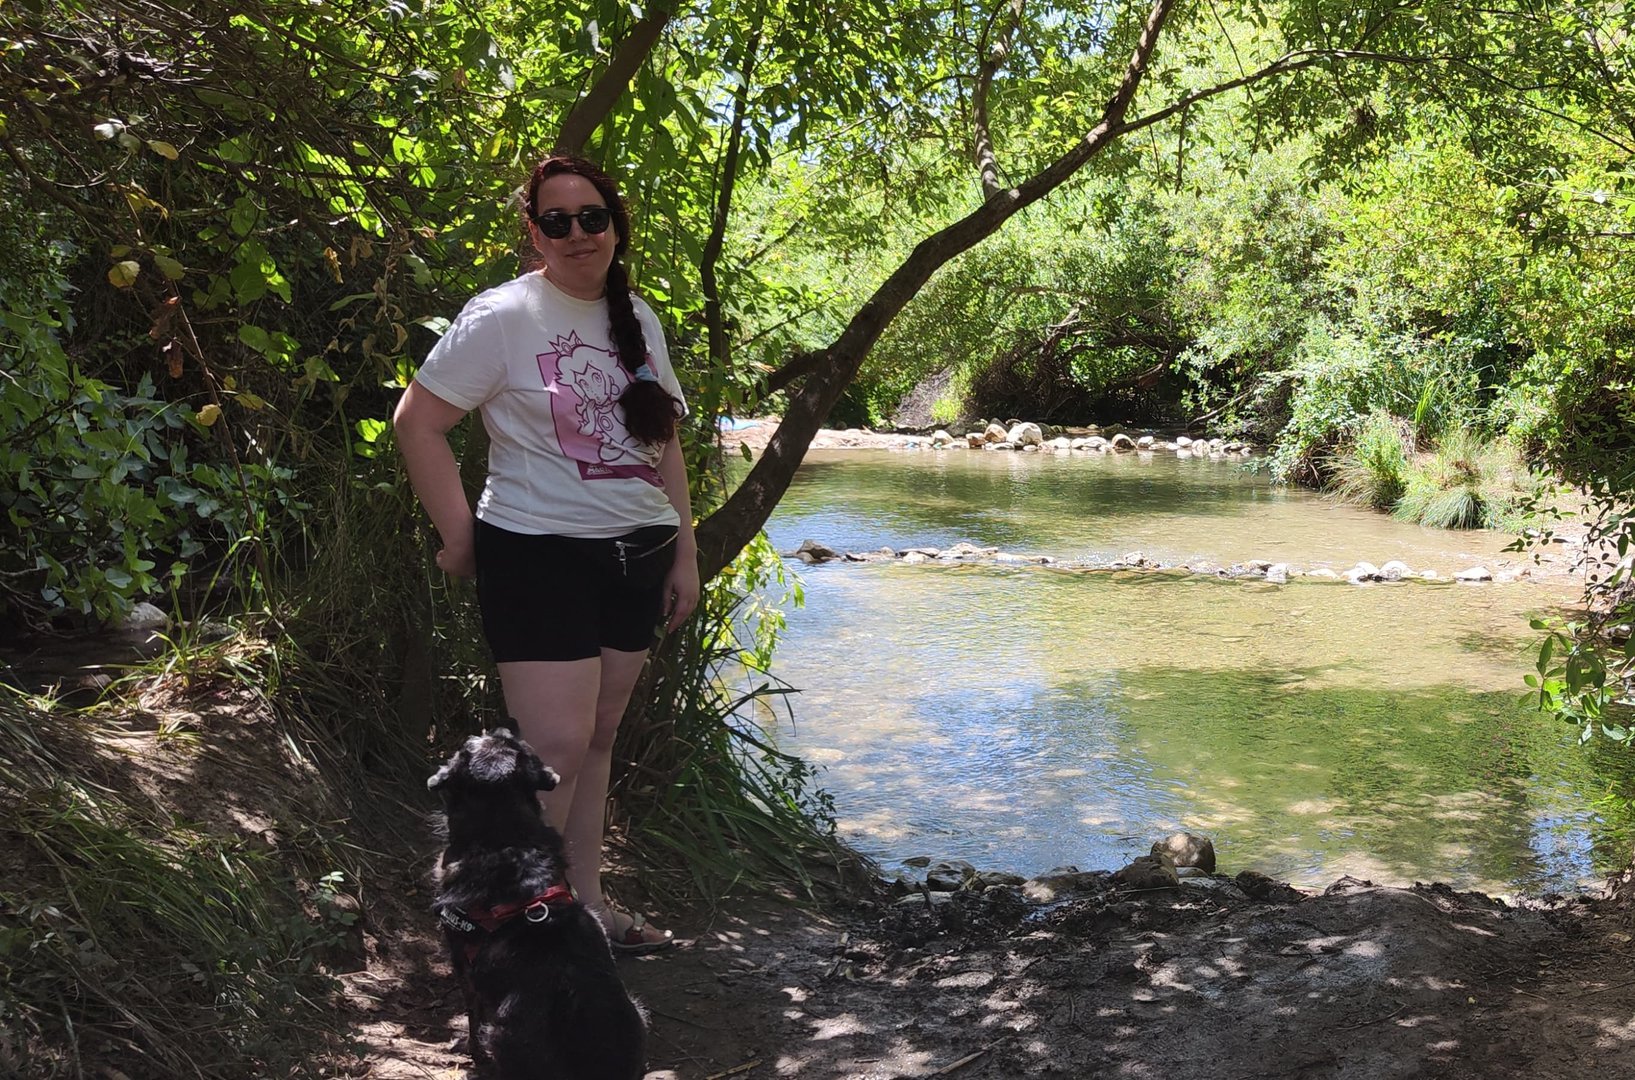 María in a river with her dog